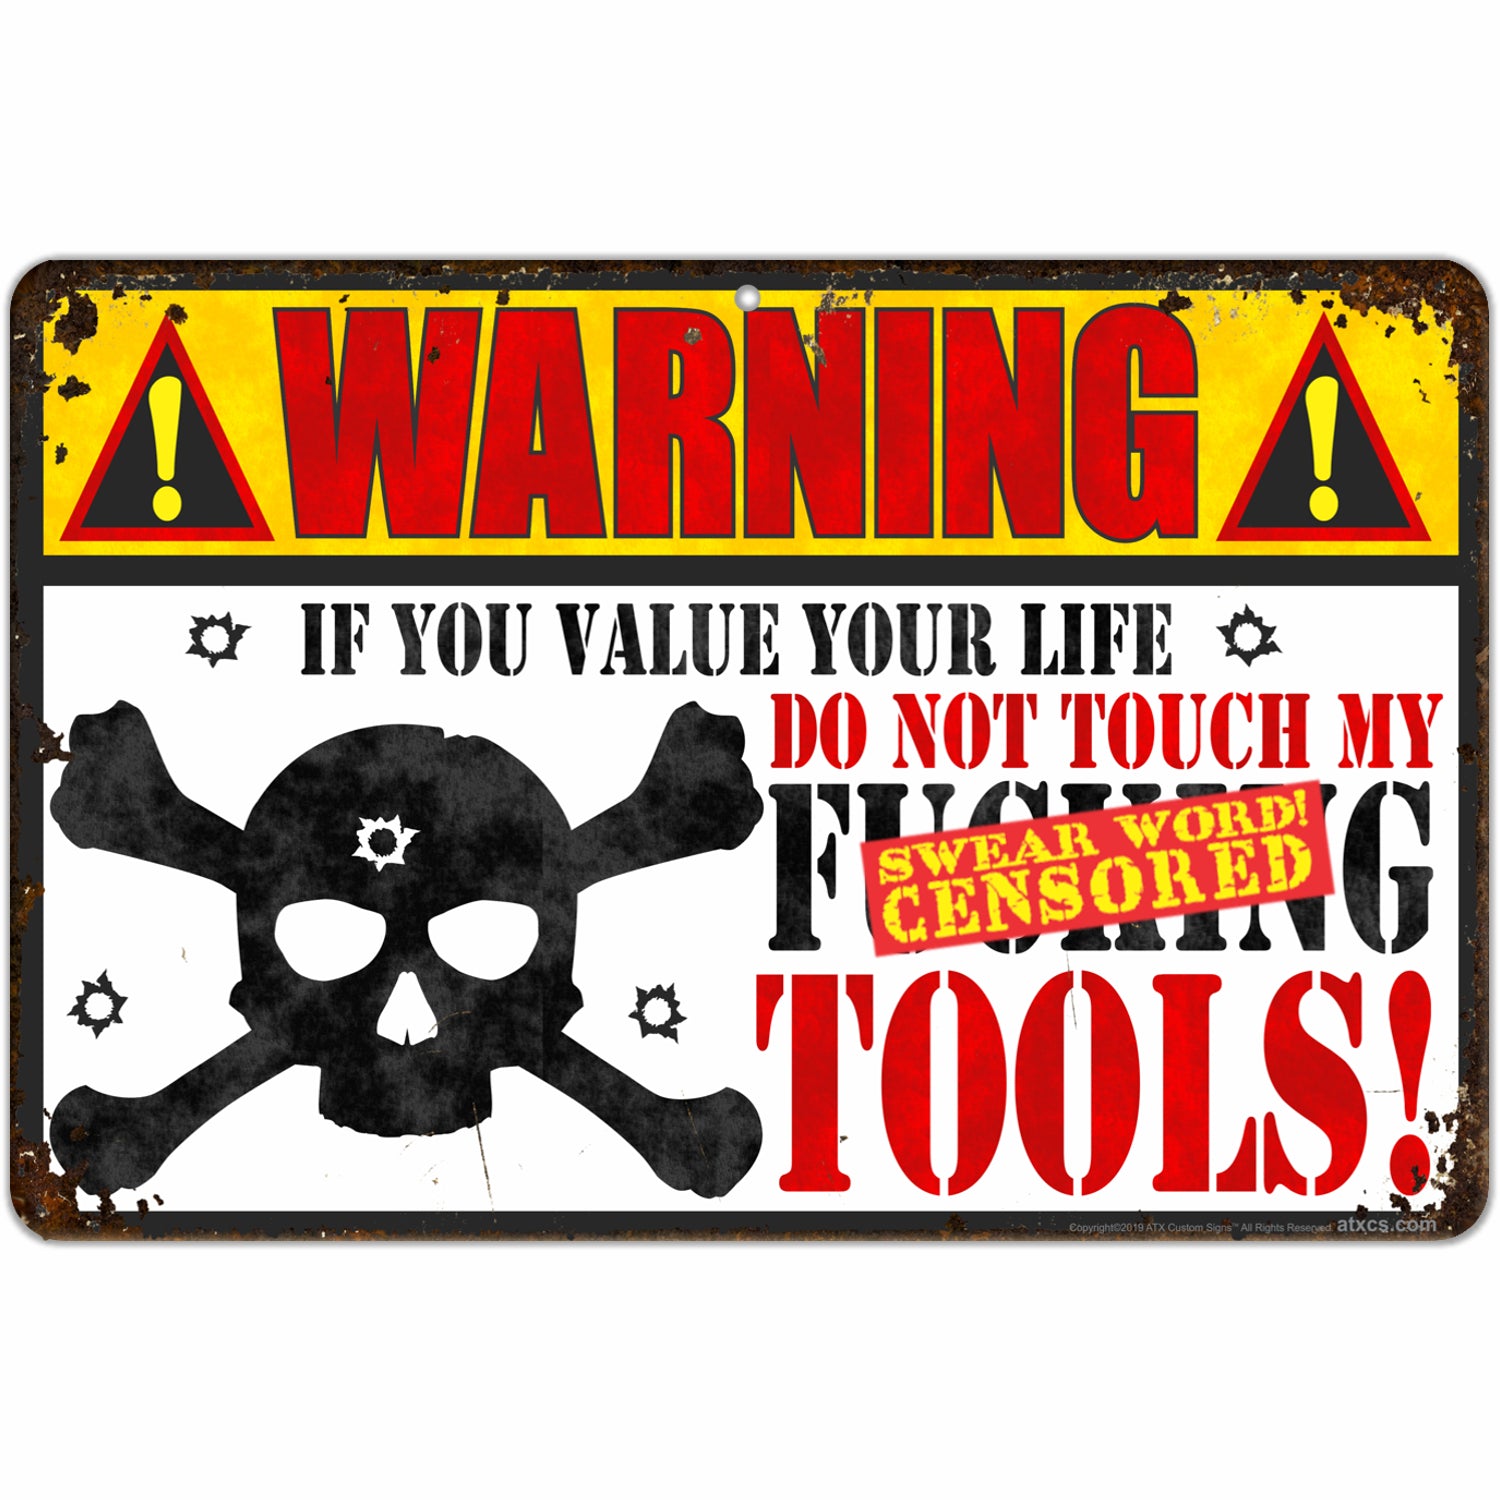 Warning If You Value Your Life, Do Not Touch My F-ing Tools! (Antique Looking)